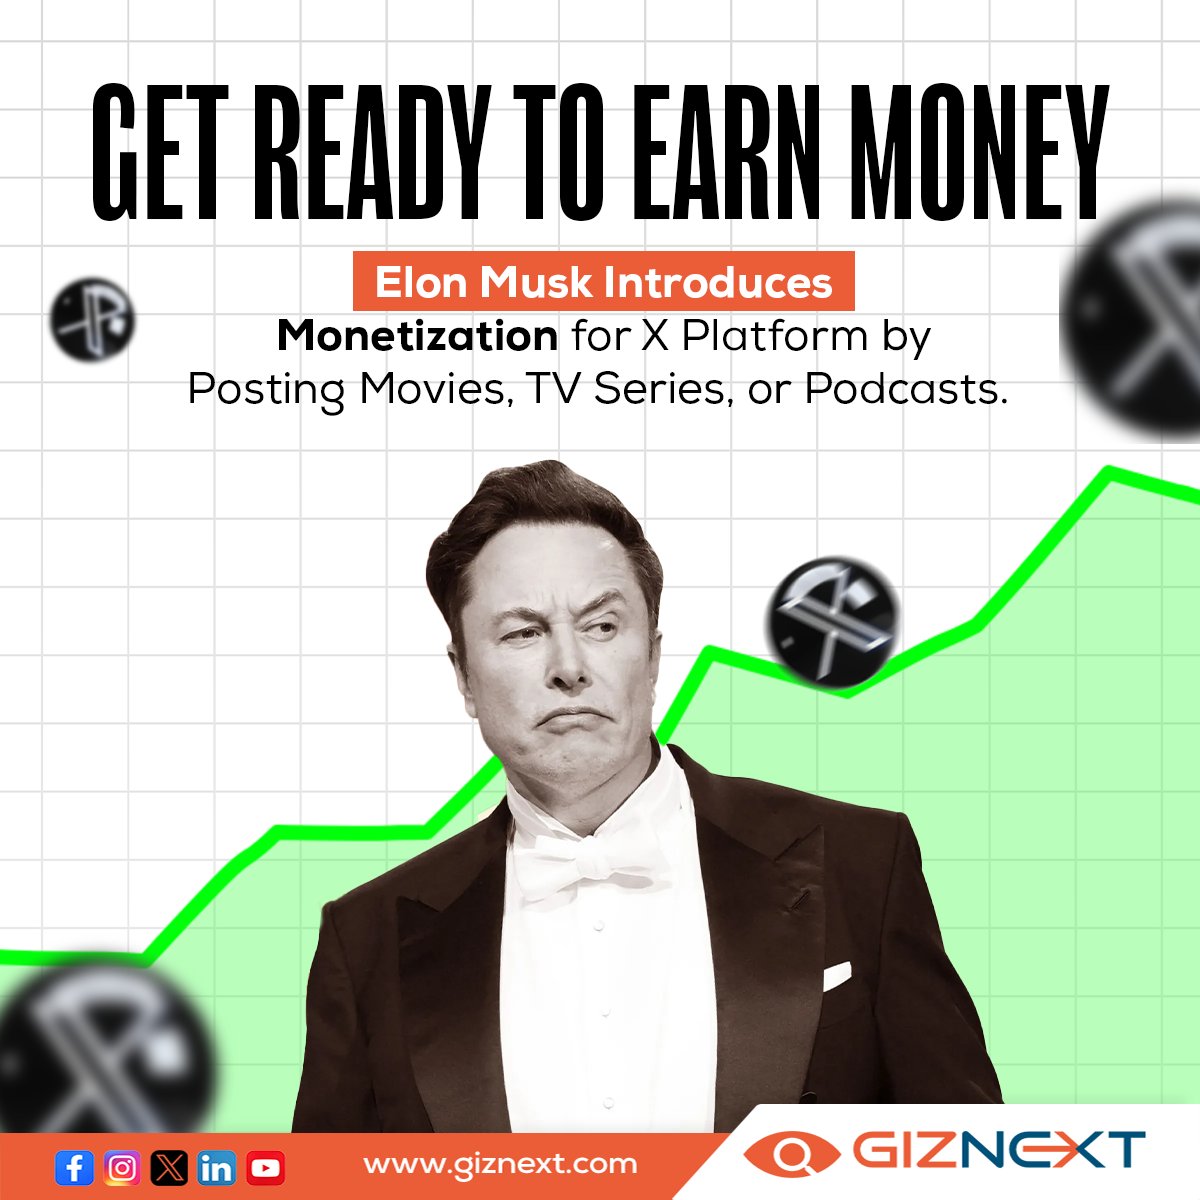 Looking to Maximize Your Earnings? 💰 X Platform Empowers Subscribers to Share and Monetize Movies, TV Series, and Podcasts. 😳💸 . . . #XUpdates #elonmusknews #NewsUpdate #socialmedia #earnmoneyonline #giznext